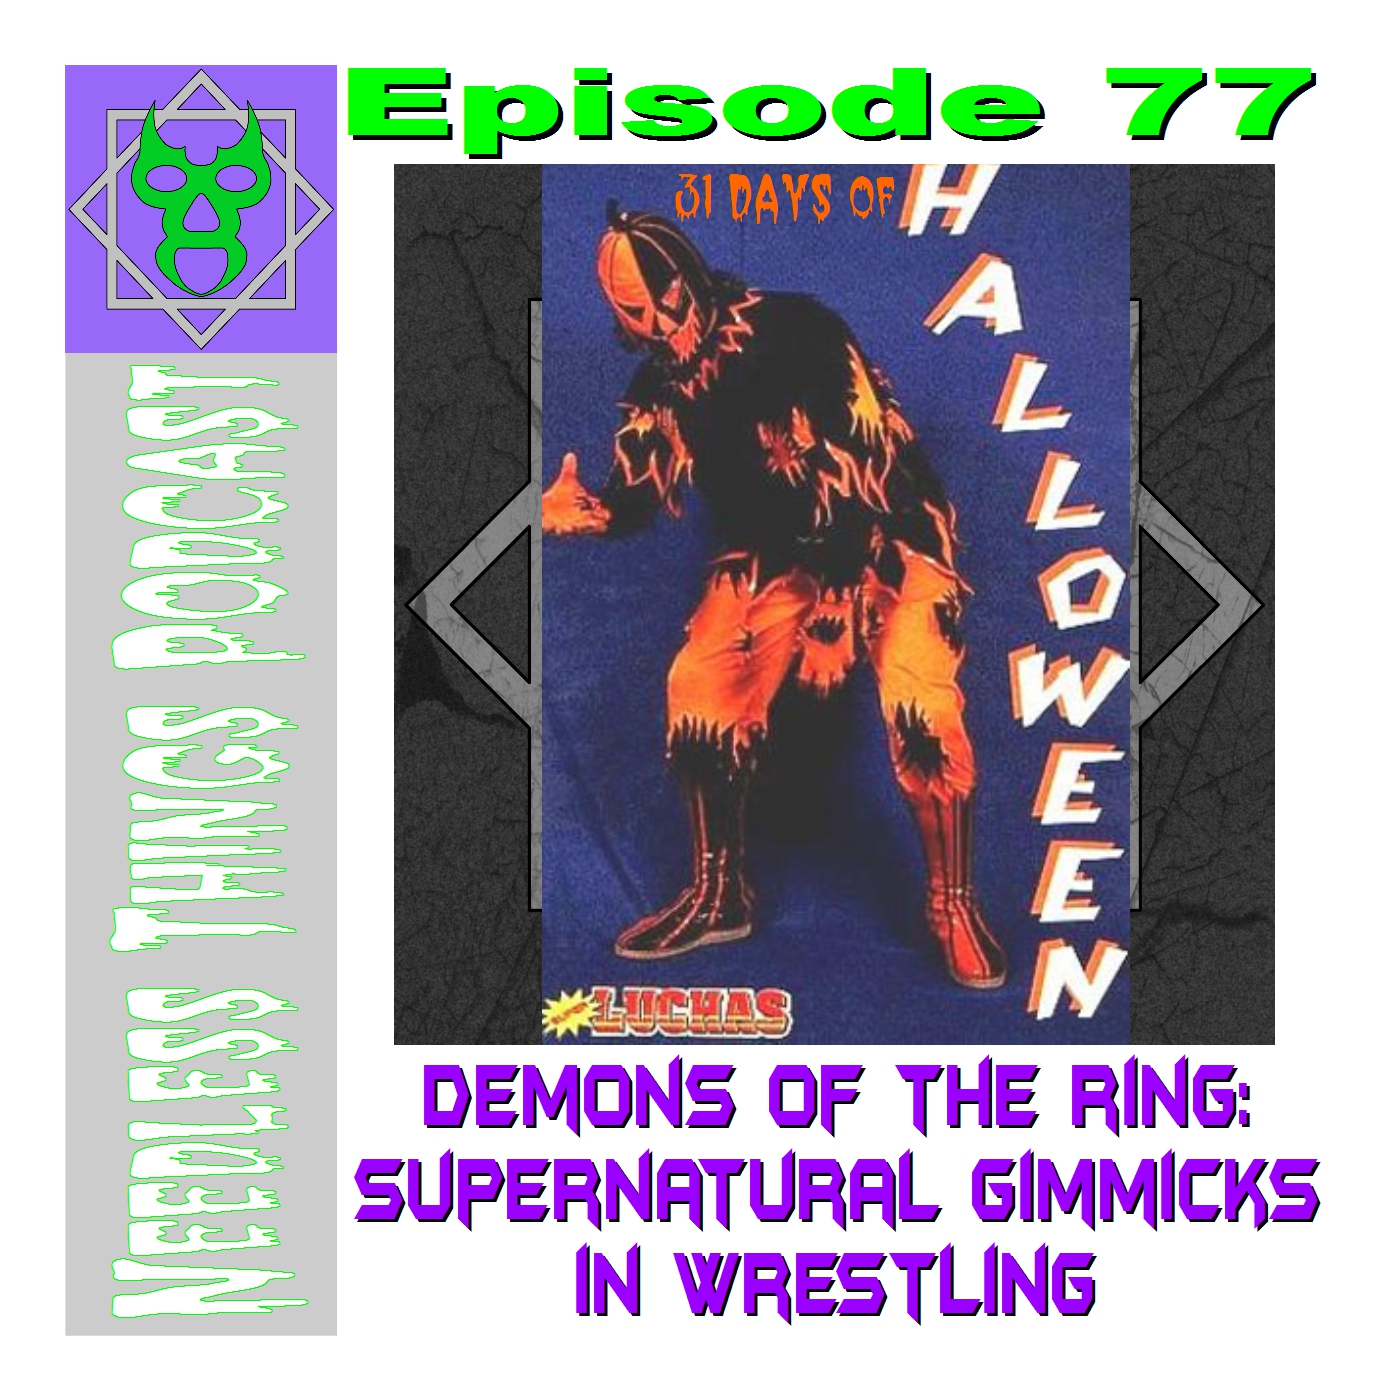 Needless Things Podcast 77 – Demons of the Ring: Supernatural Gimmicks in Wrestling